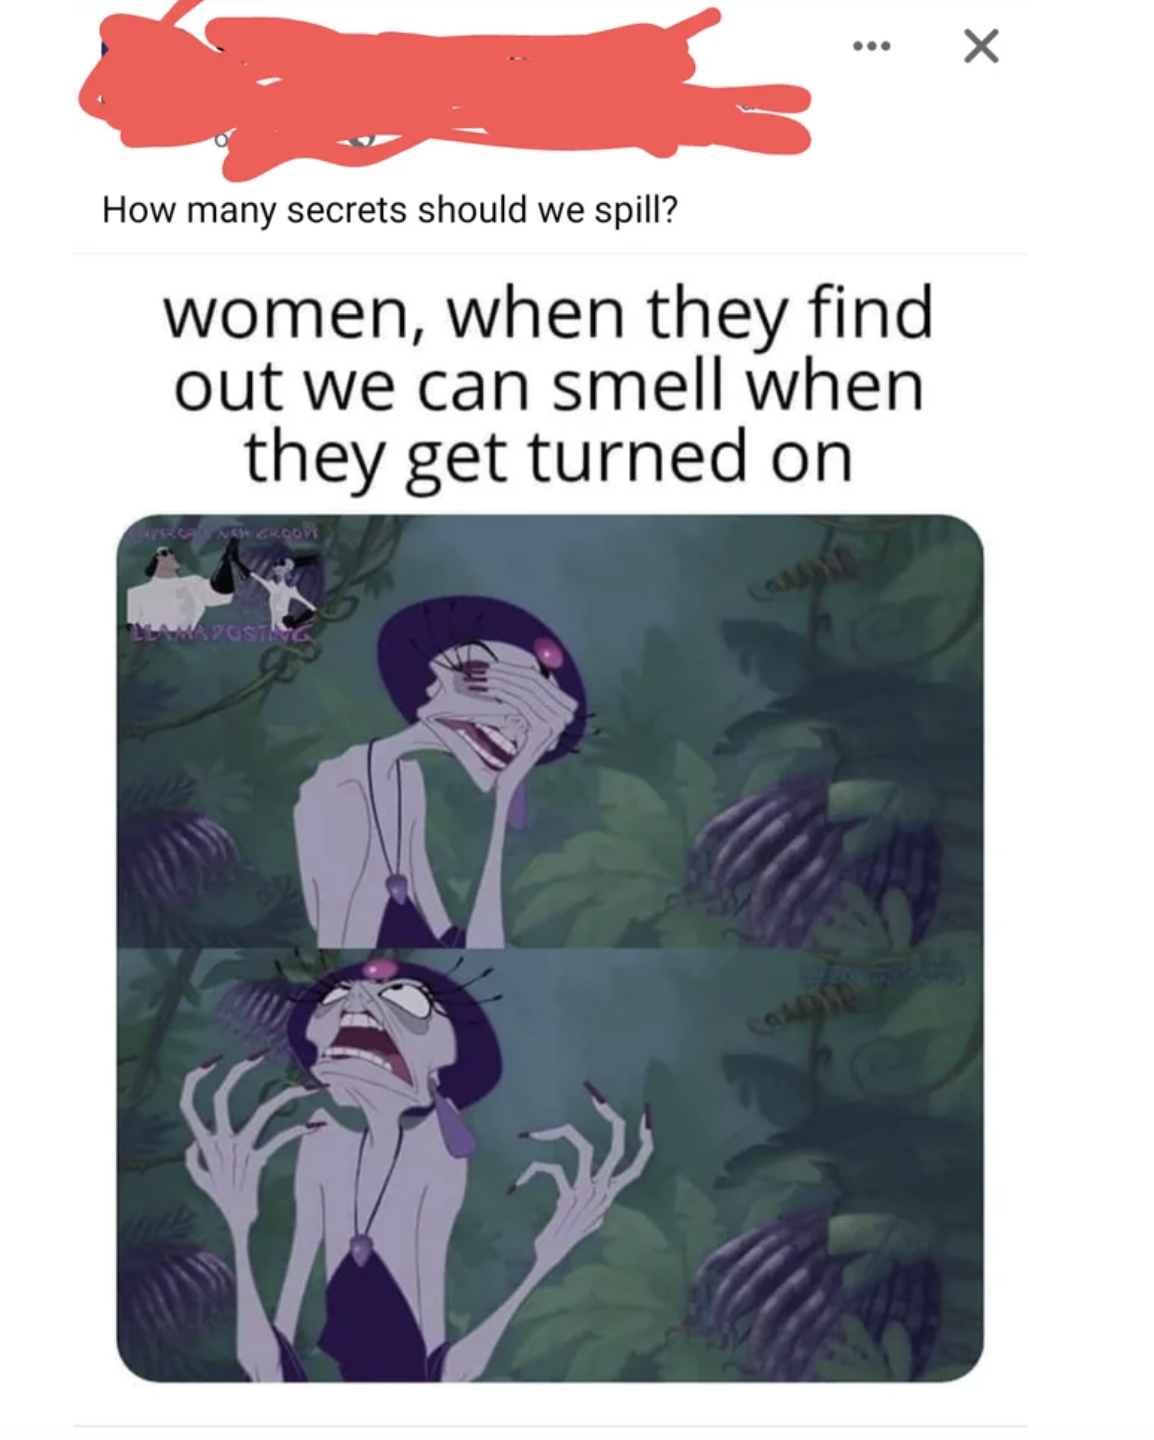 &quot;women, when they found out we can smell when they get turned on&quot;